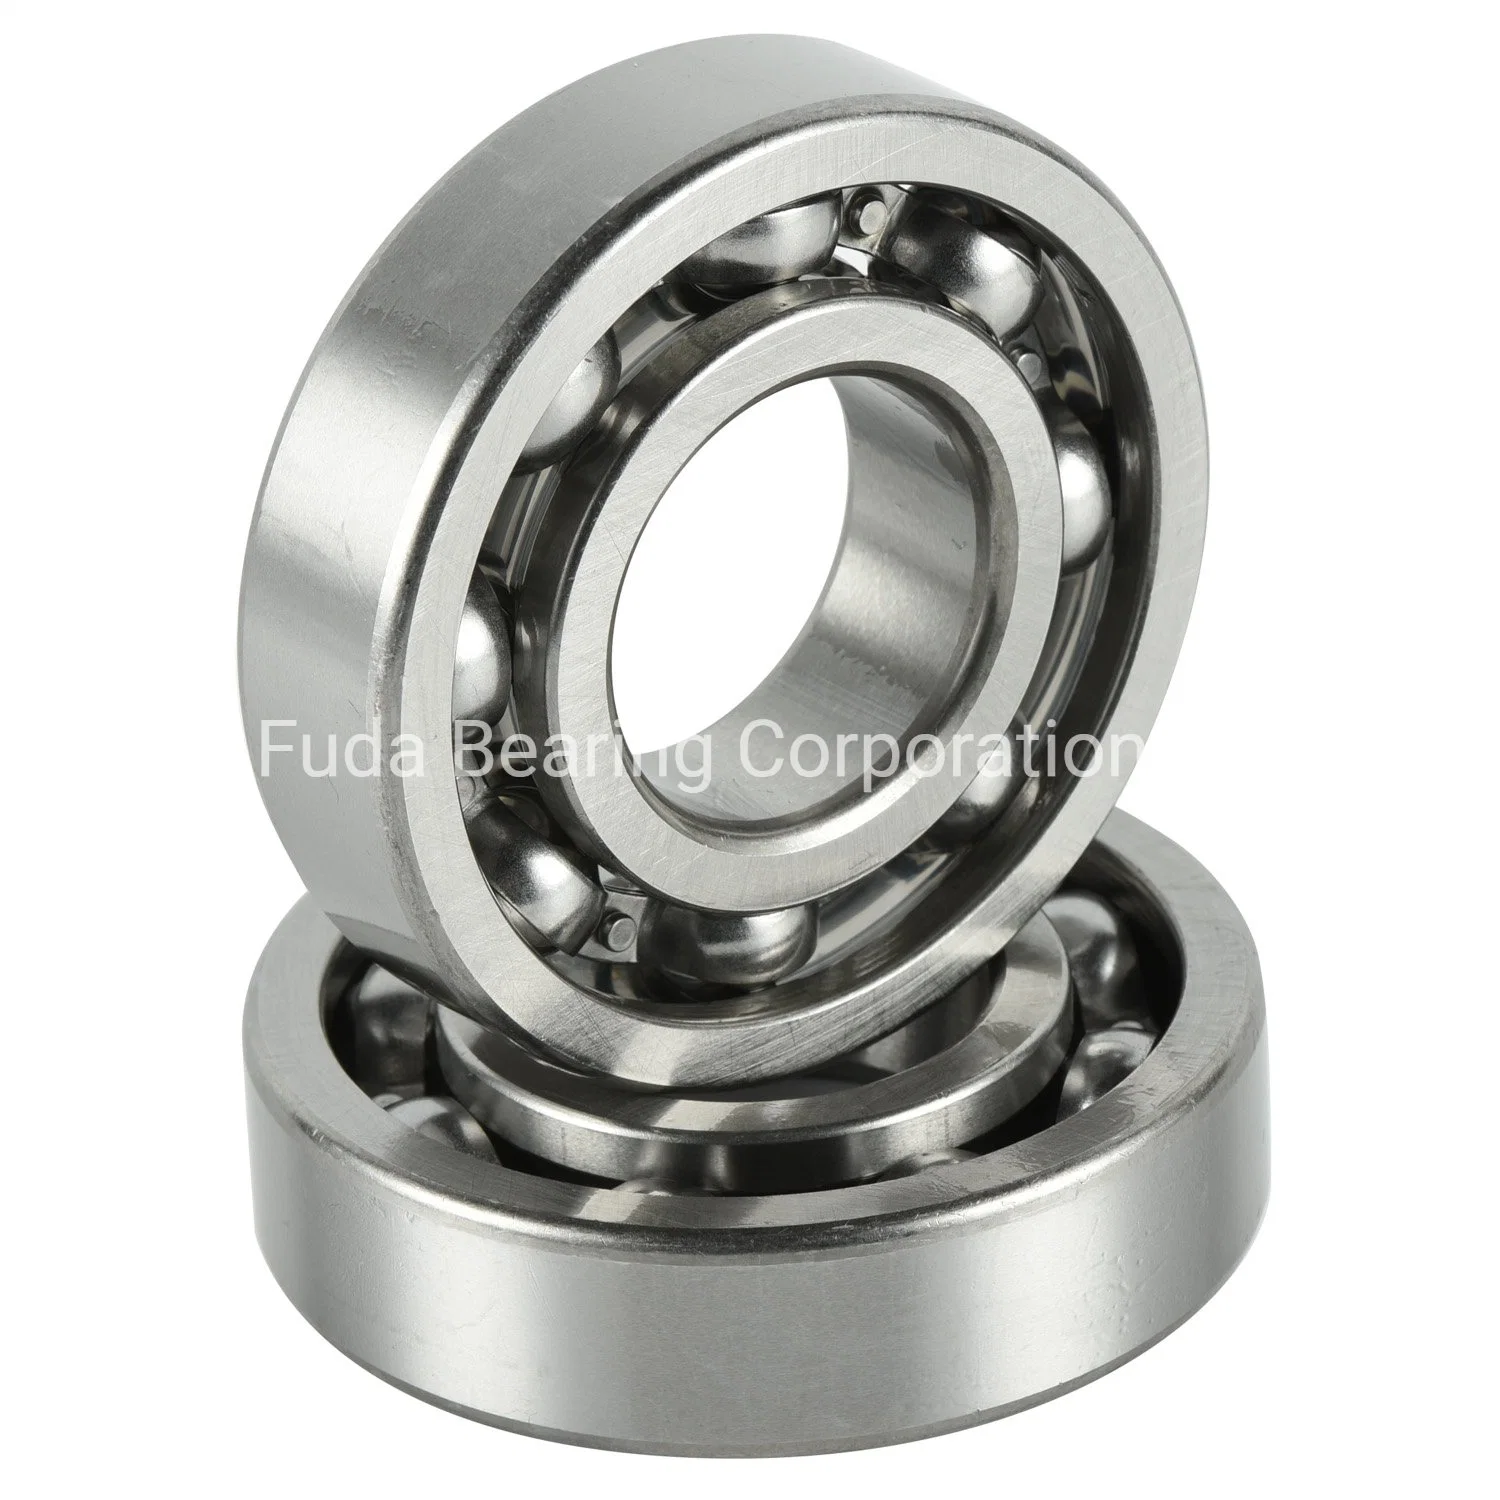 F&D Bearings 6202 2Z Electric tools accessories power tool accessories for Machinery parts